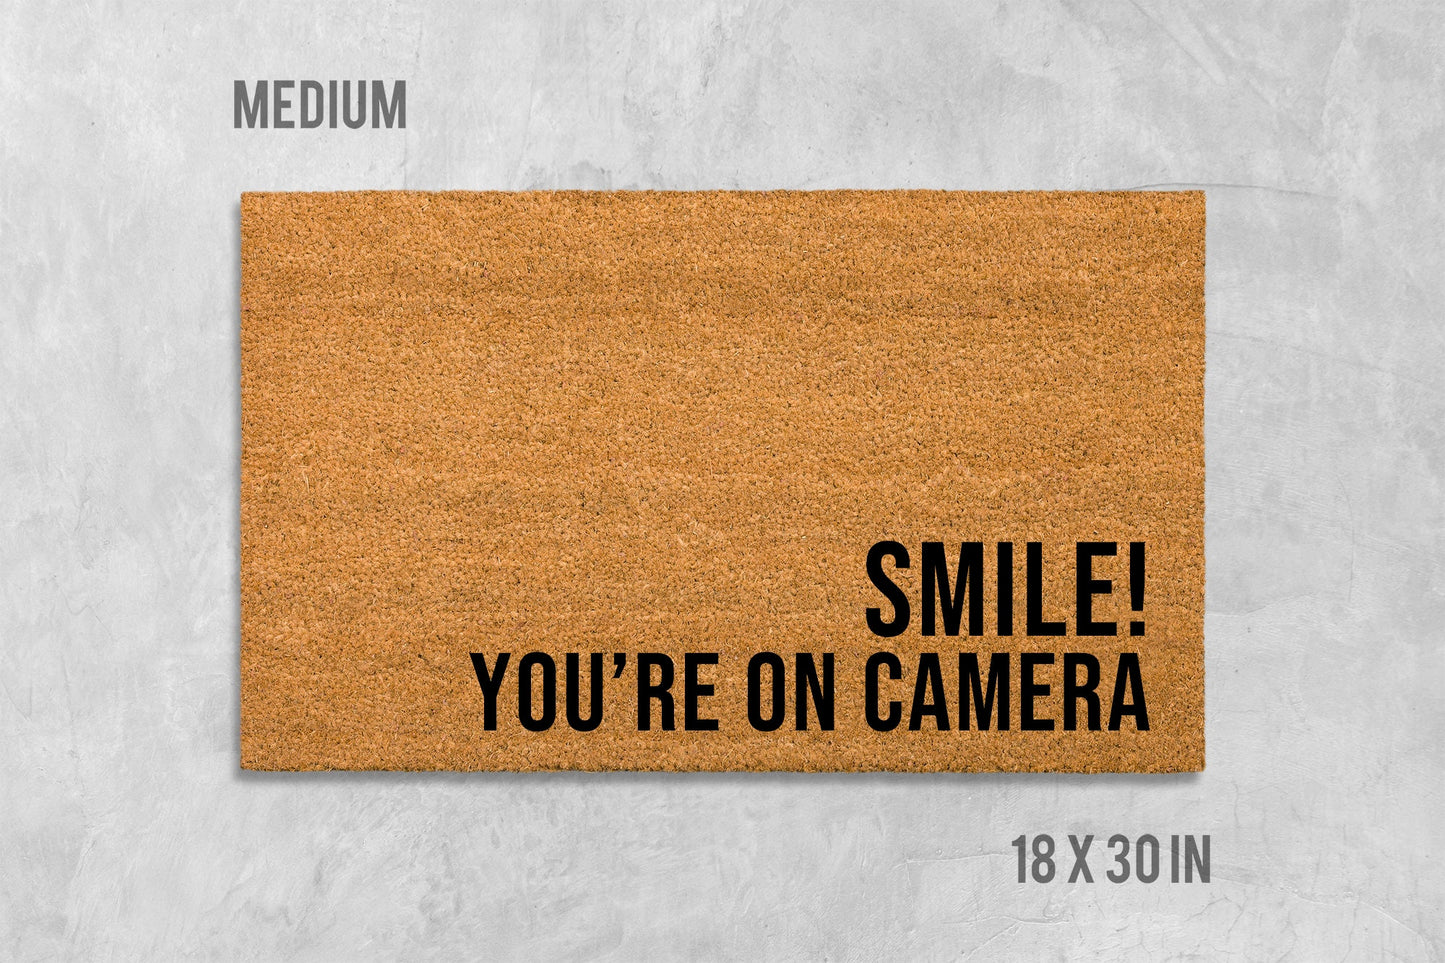 Smile! You're On Camera